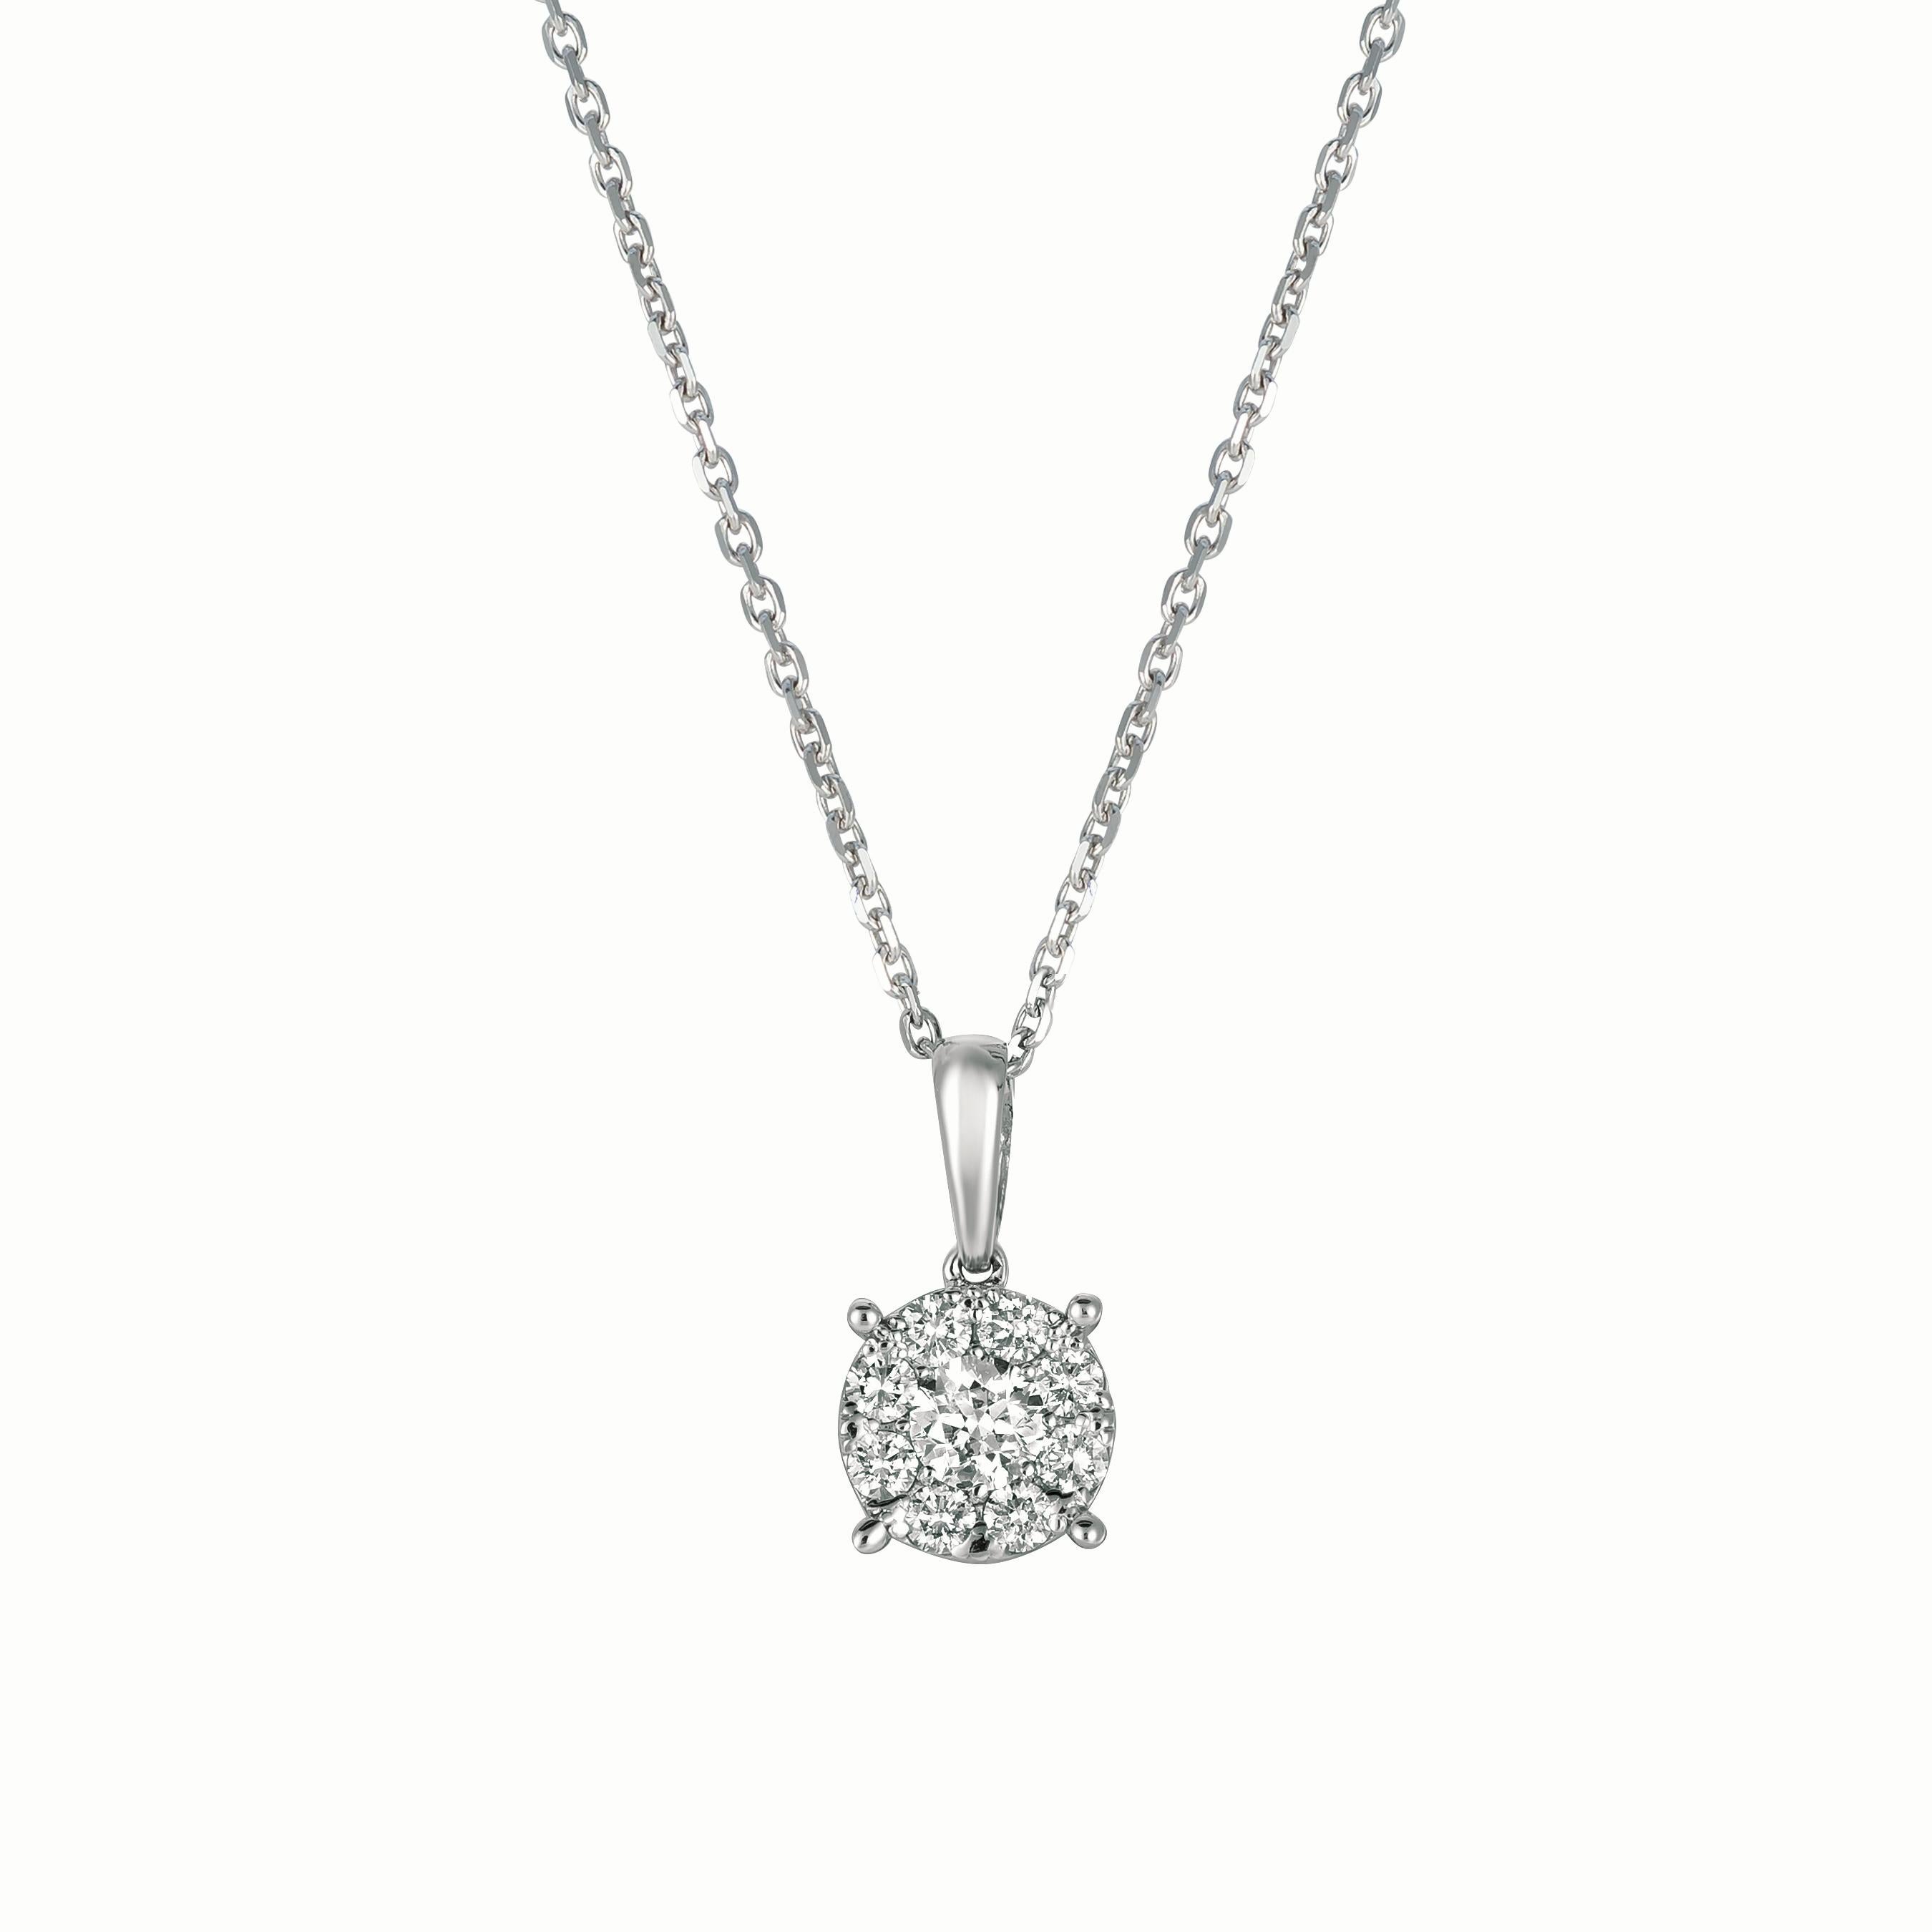 0.50 Carat Natural Diamond Necklace 14K White Gold G SI 18 inches chain

100% Natural Diamonds, Not Enhanced in any way Round Cut Diamond Necklace  
0.50CT
G-H 
SI  
9/16 inch in height, 5/16 inch in width
14K White Gold,    Prong style,    2.5